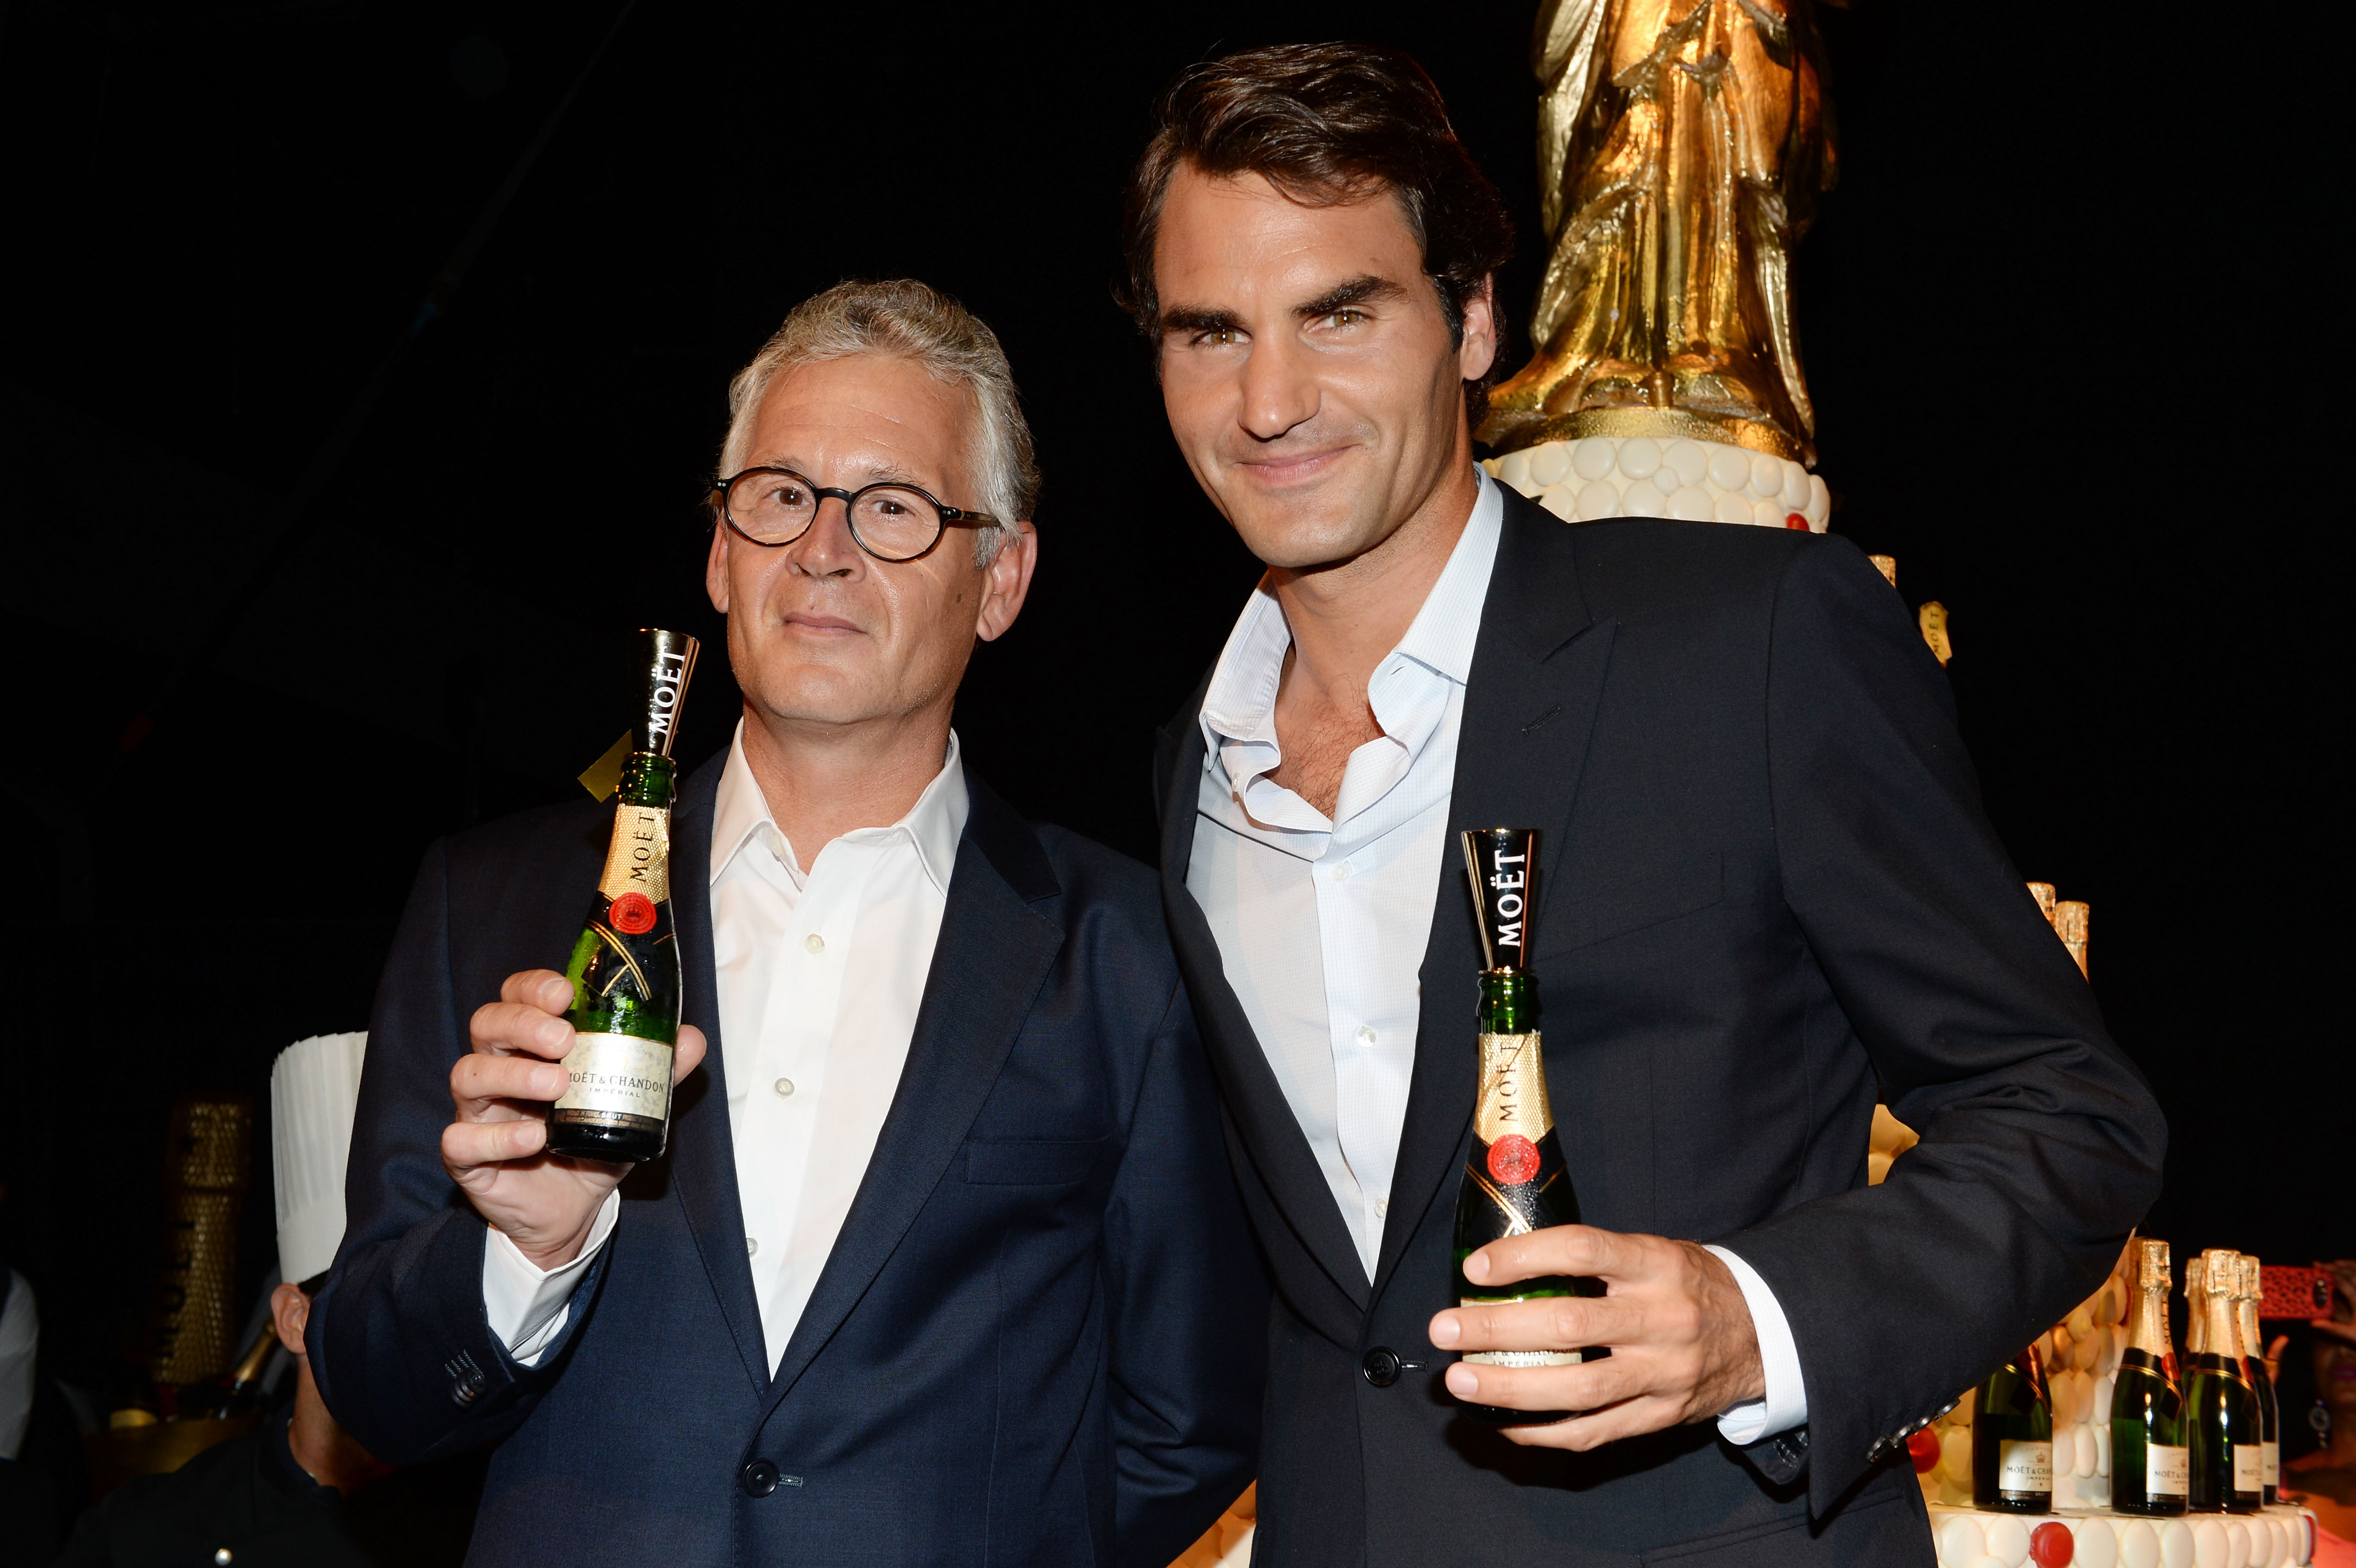 NEW YORK, NY - AUGUST 20:  Moet & Chandon CEO Stephane Baschiera (L) and Professional Tennis Player Roger Federer speak onstage at Moet & Chandon Celebrates Its 270th Anniversary With New Global Brand Ambassador, International Tennis Champion, Roger Federer at Chelsea Piers Sports Center on August 20, 2013 in New York City.  (Photo by Andrew H. Walker/Getty Images for Moet & Chandon)